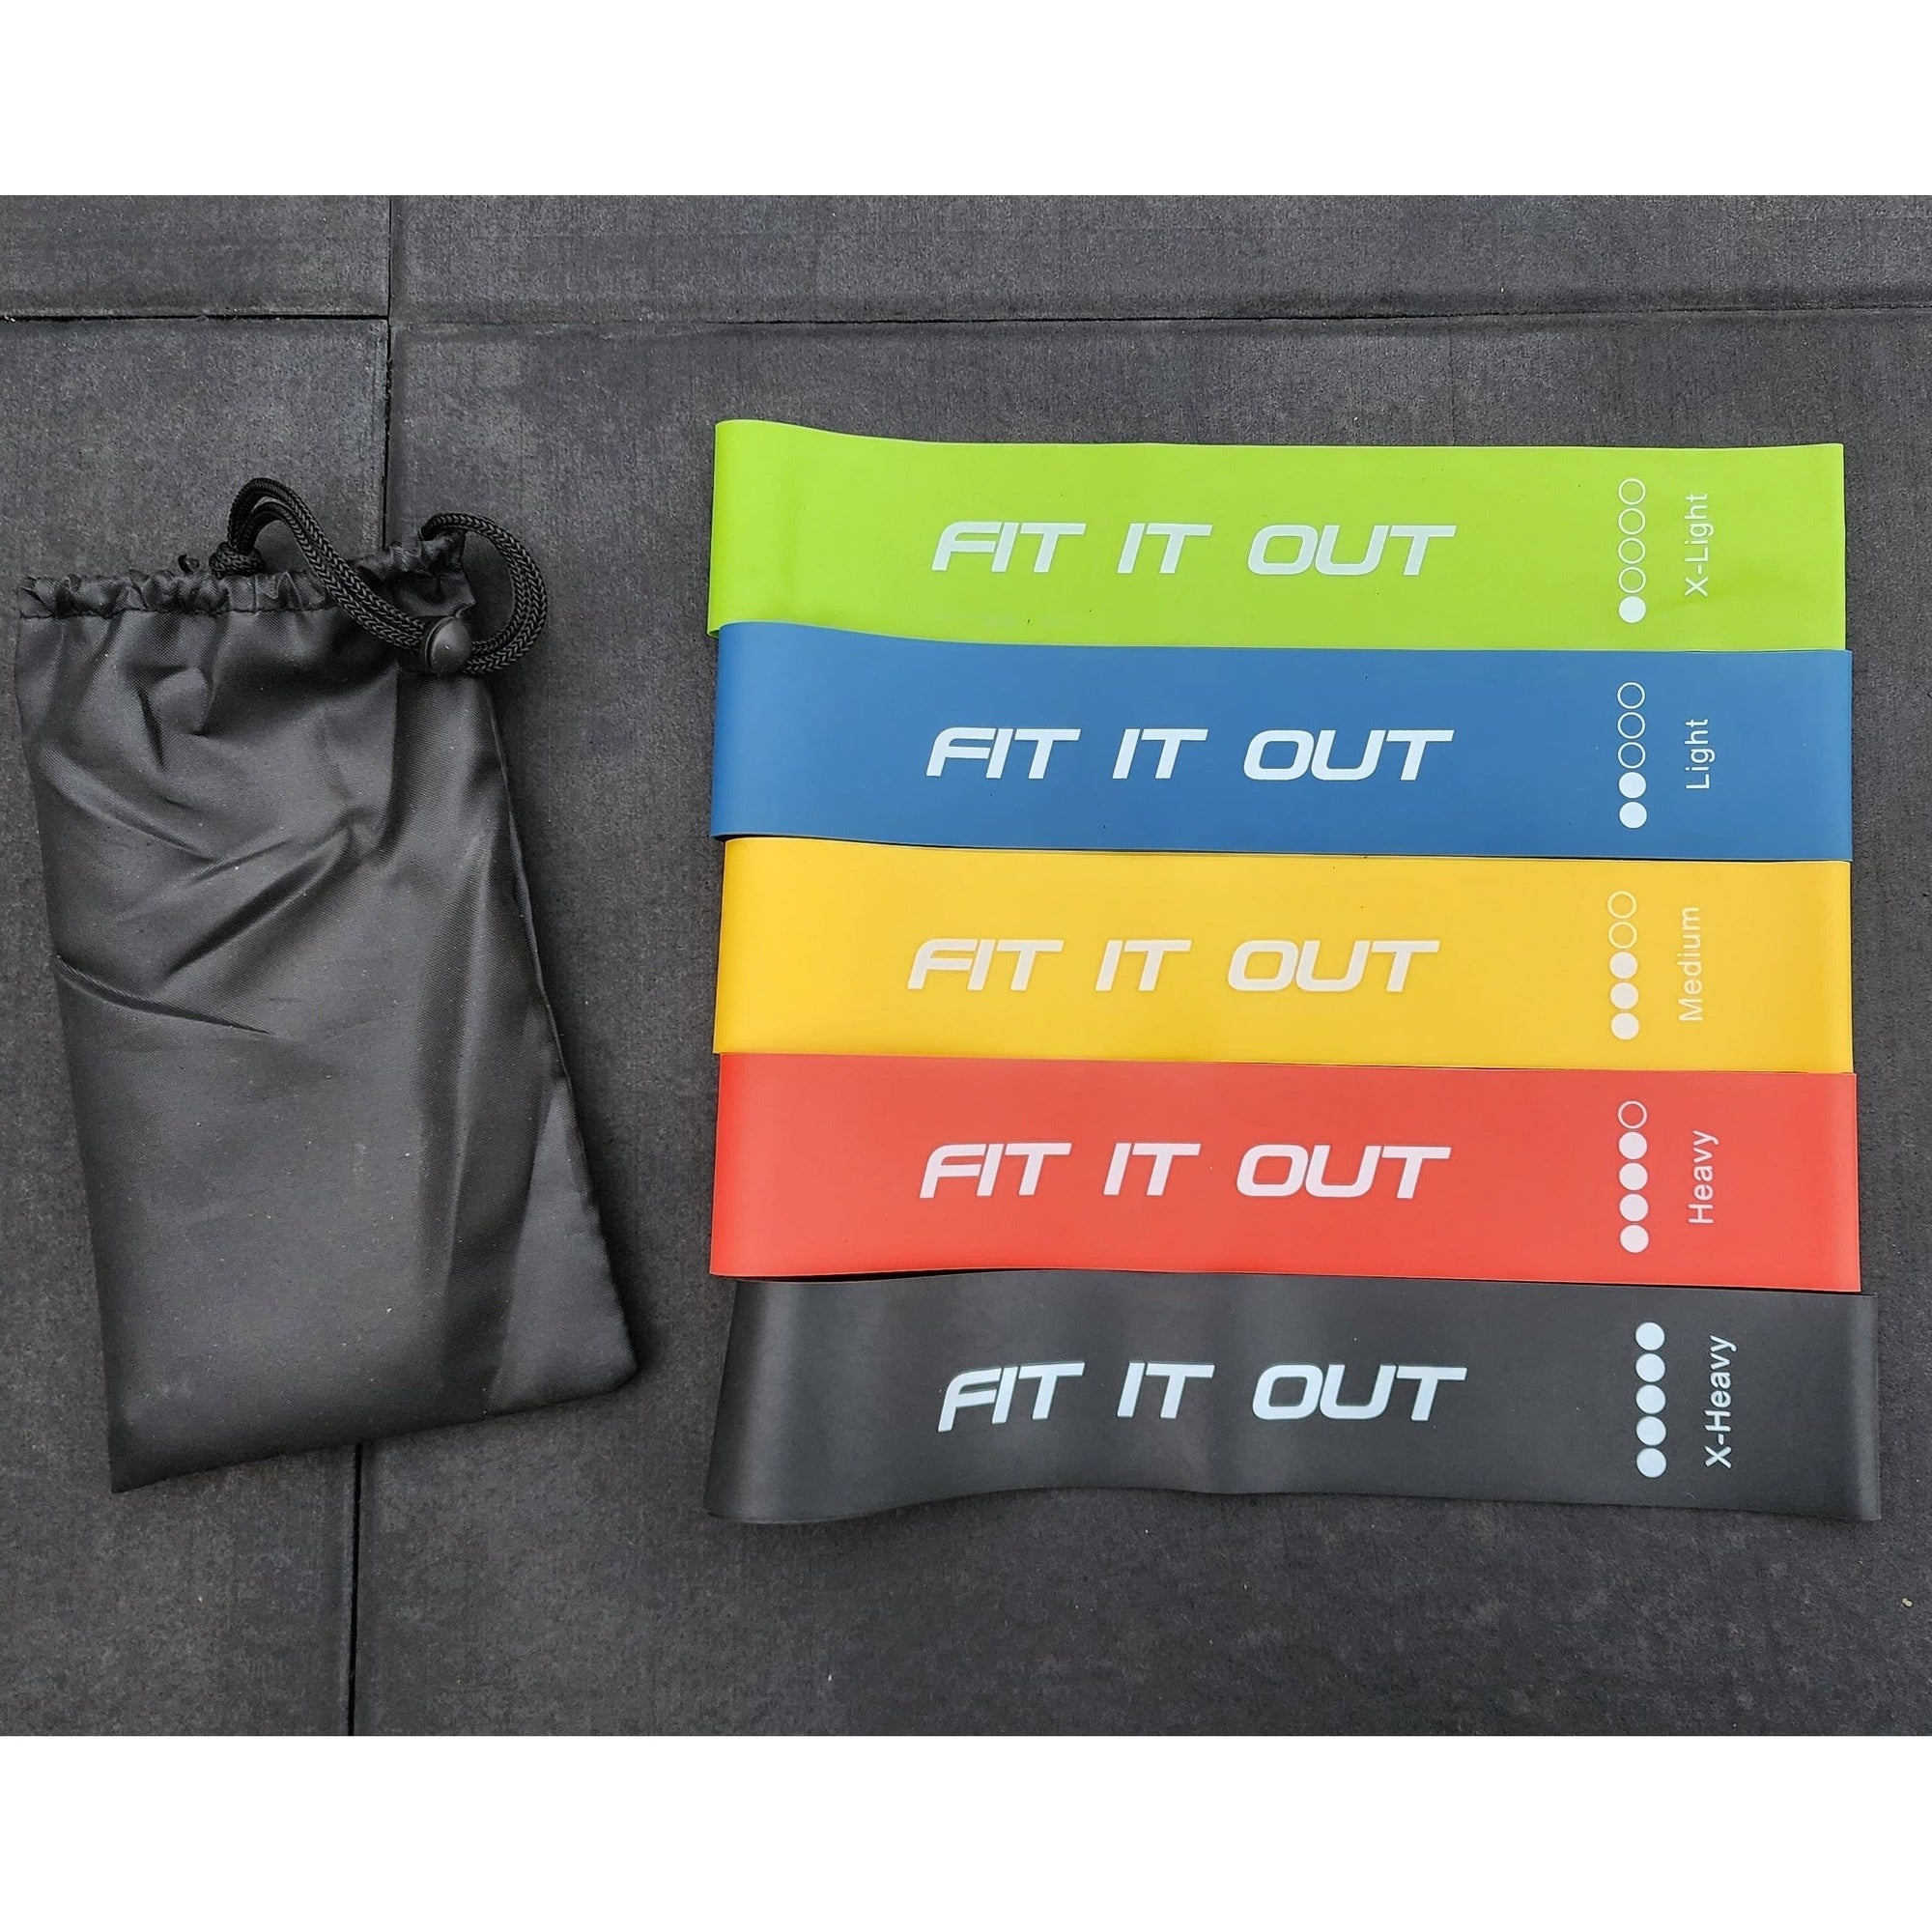 Fit It Out Rubber Loop Bands - set of 5